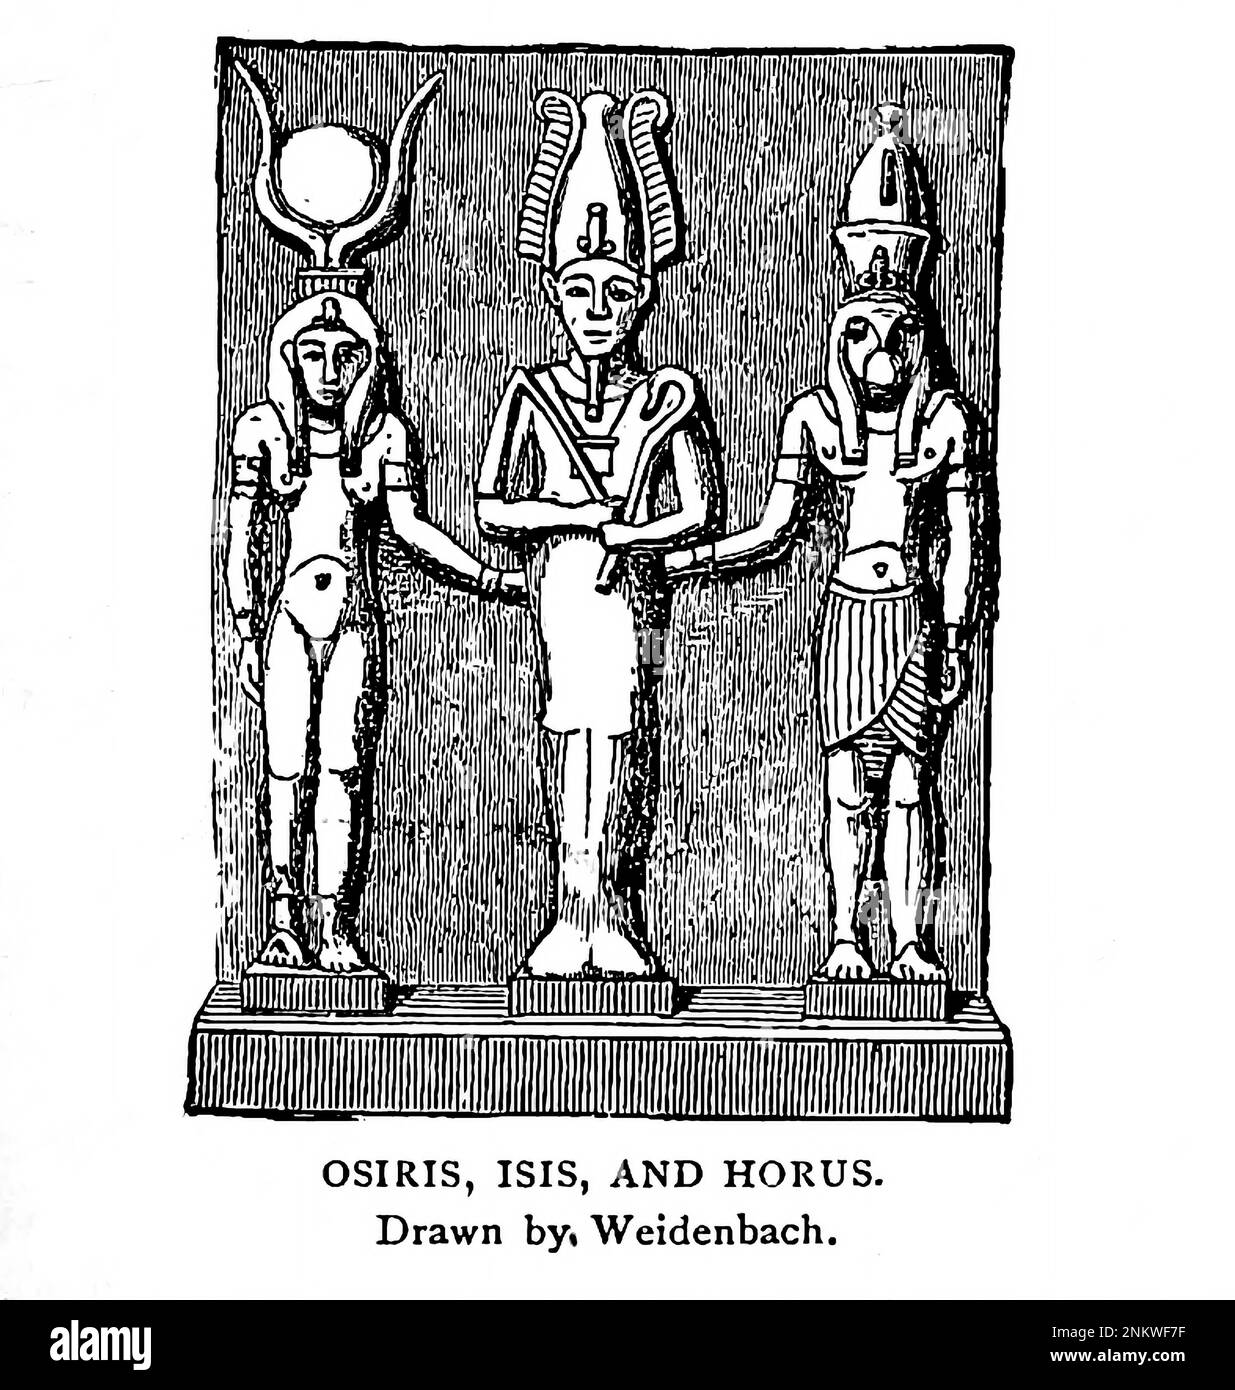 OSIRIS ISIS AND HORUS from Book XVIII the Hamites from Cyclopedia universal history : embracing the most complete and recent presentation of the subject in two principal parts or divisions of more than six thousand pages by John Clark Ridpath, 1840-1900 Publication date 1895 Publisher Boston : Balch Bros. Volume 6 History of Man and Mankind Stock Photo